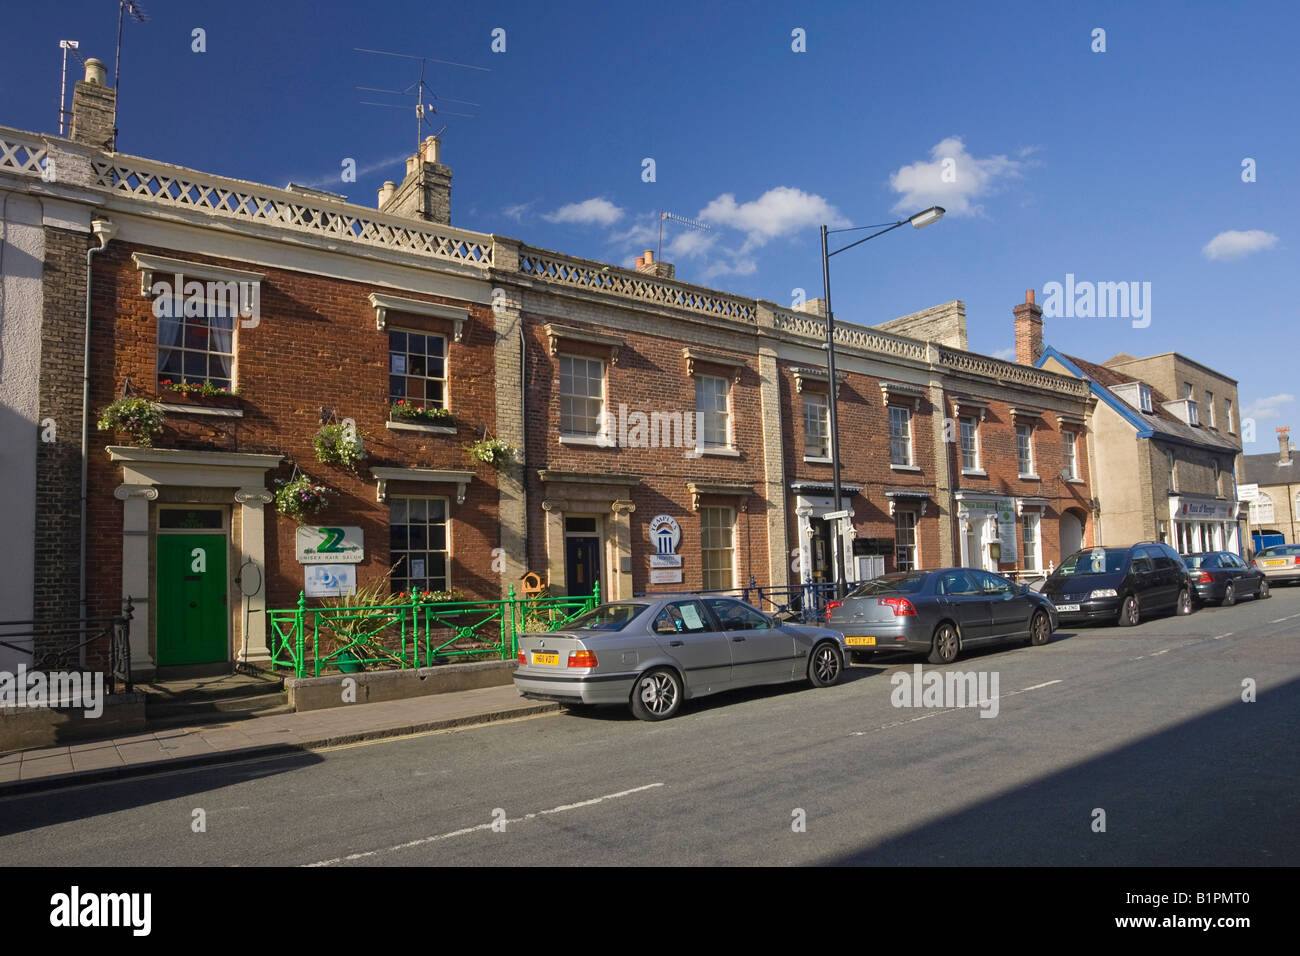 Risbygate Street in Bury St Edmunds, UK with several small businesses Stock Photo